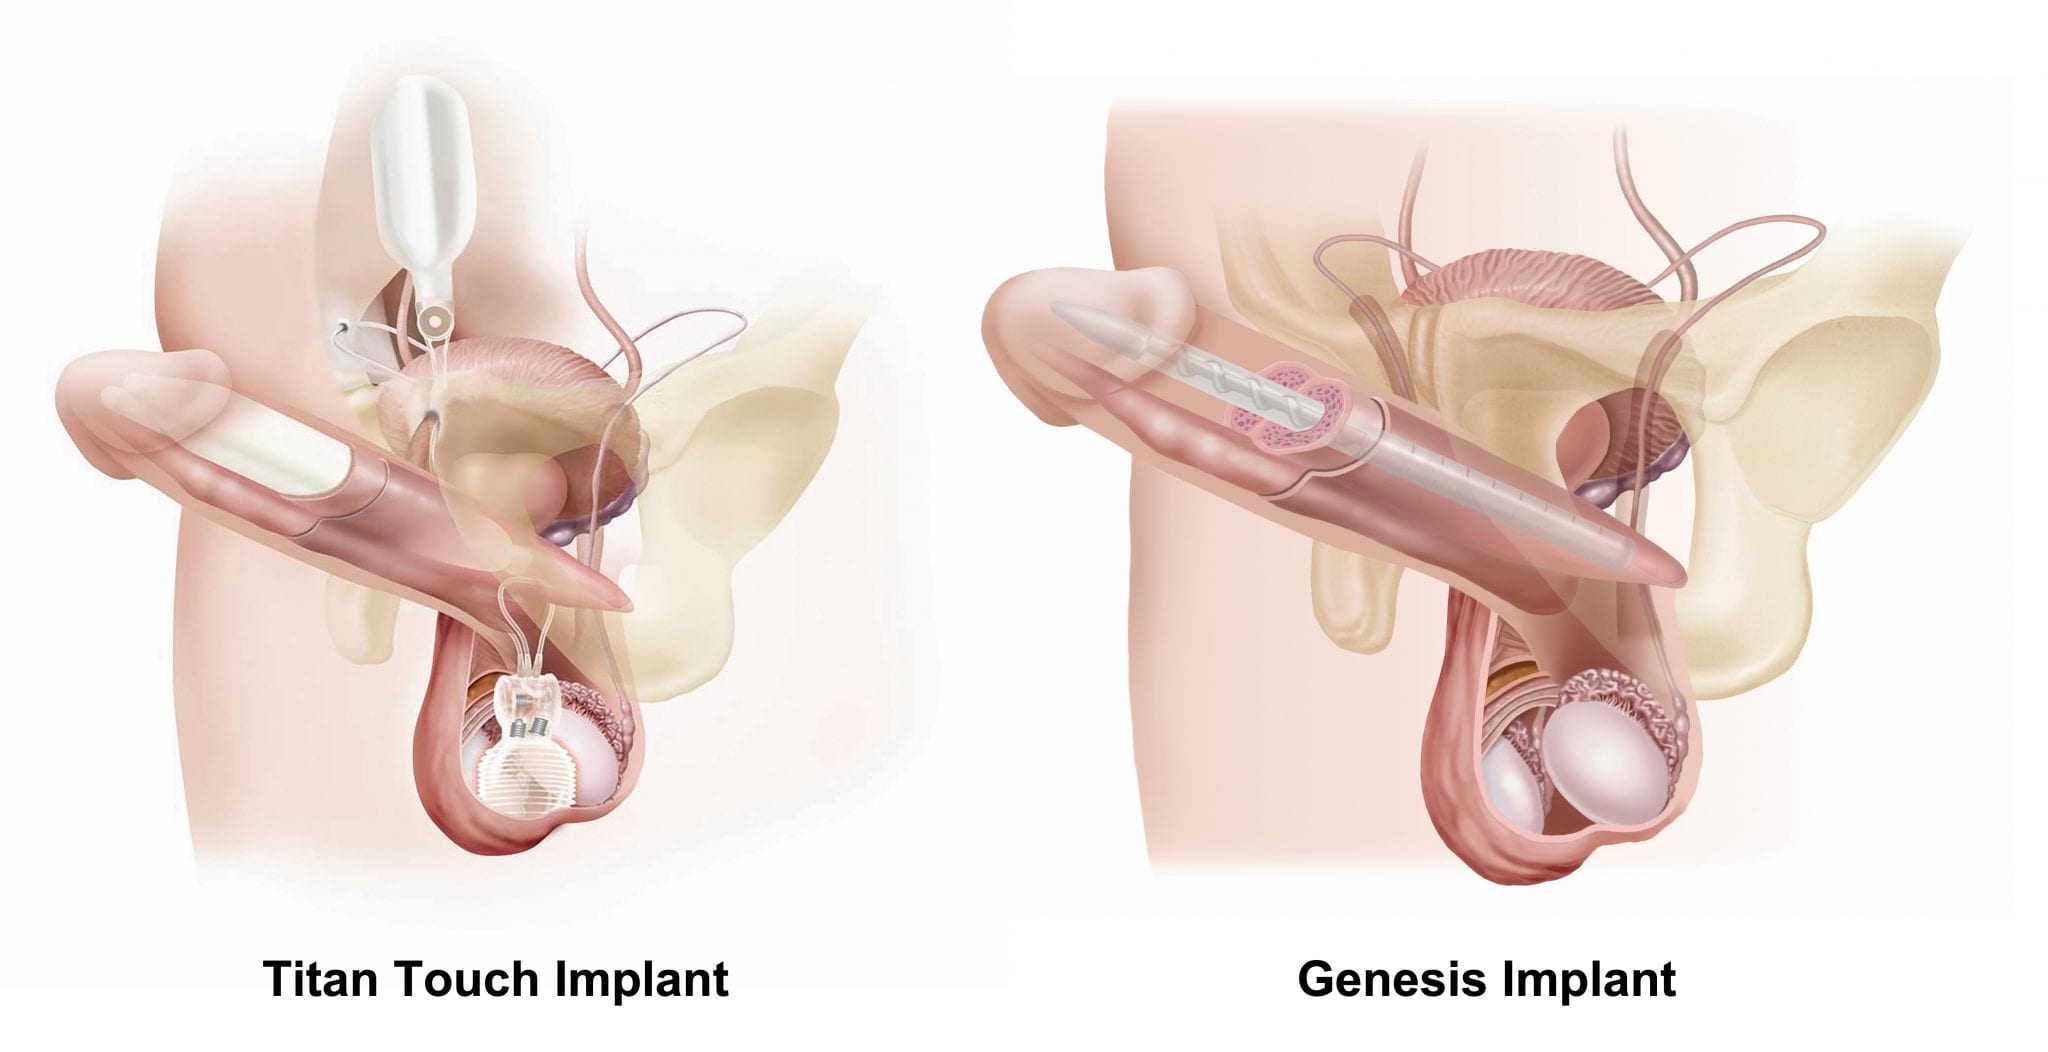 Tiatan Touch Penile Implant and Genesis Implant Illustration 